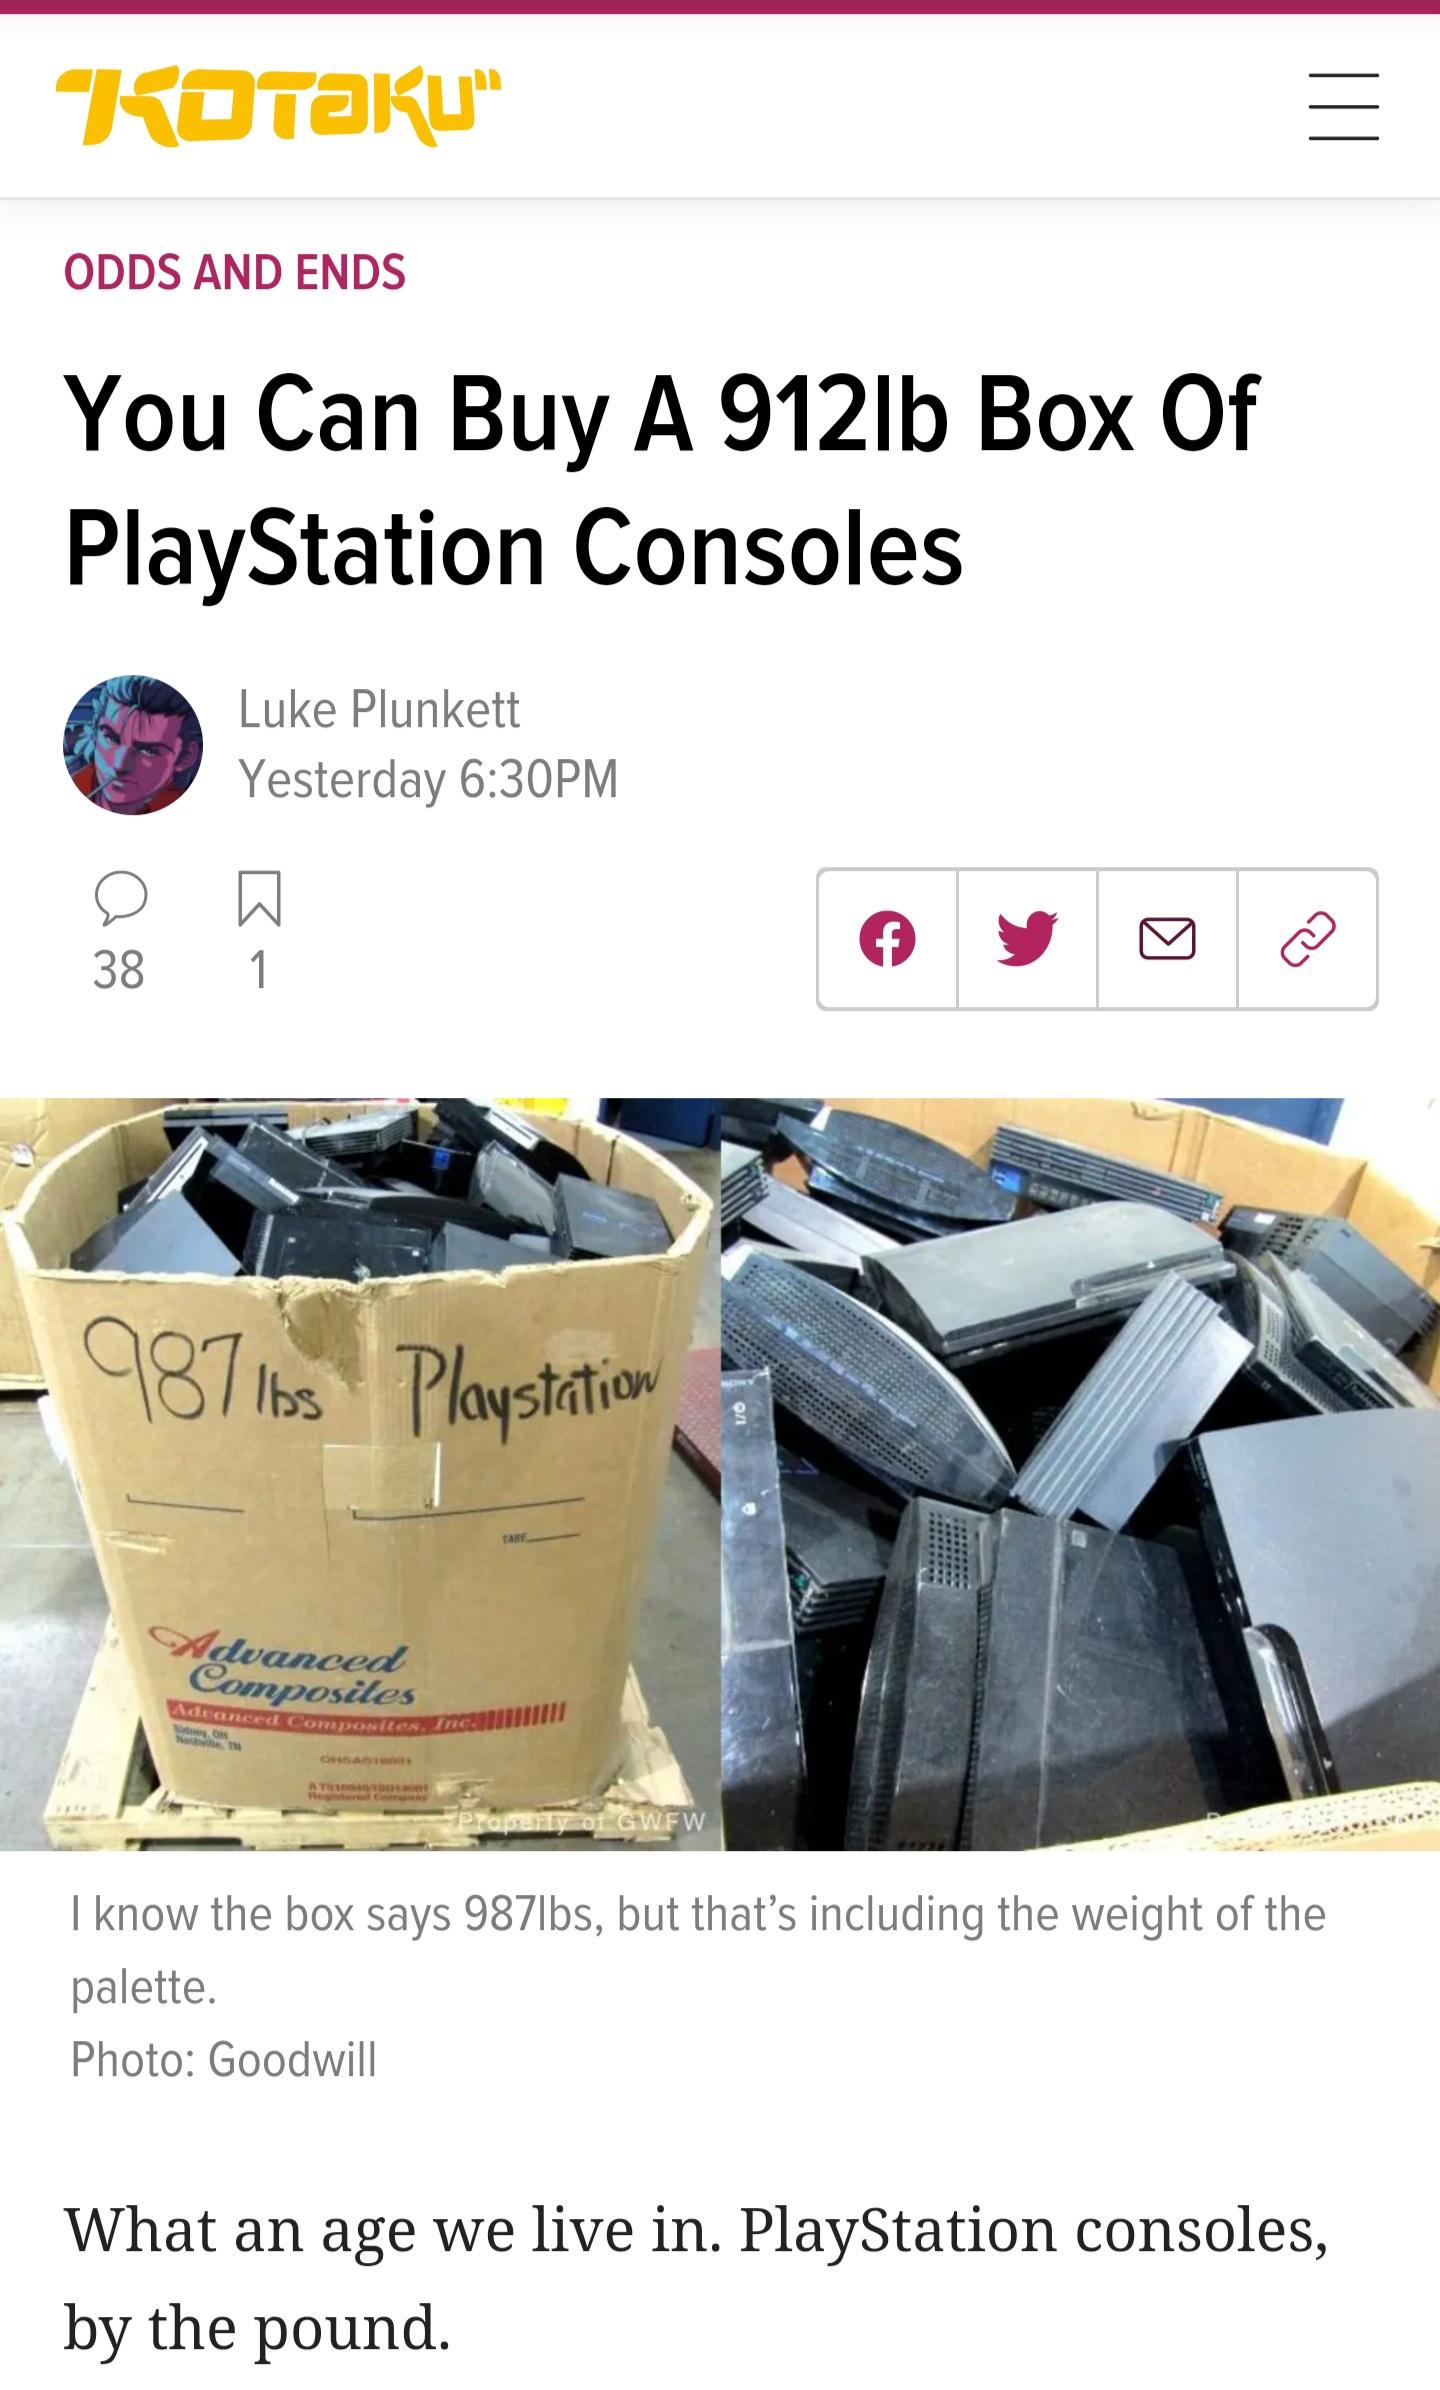 funny pics - you can buy a 912 pound box of playstation consoles - what an age we live in: playstation consoles by the pound